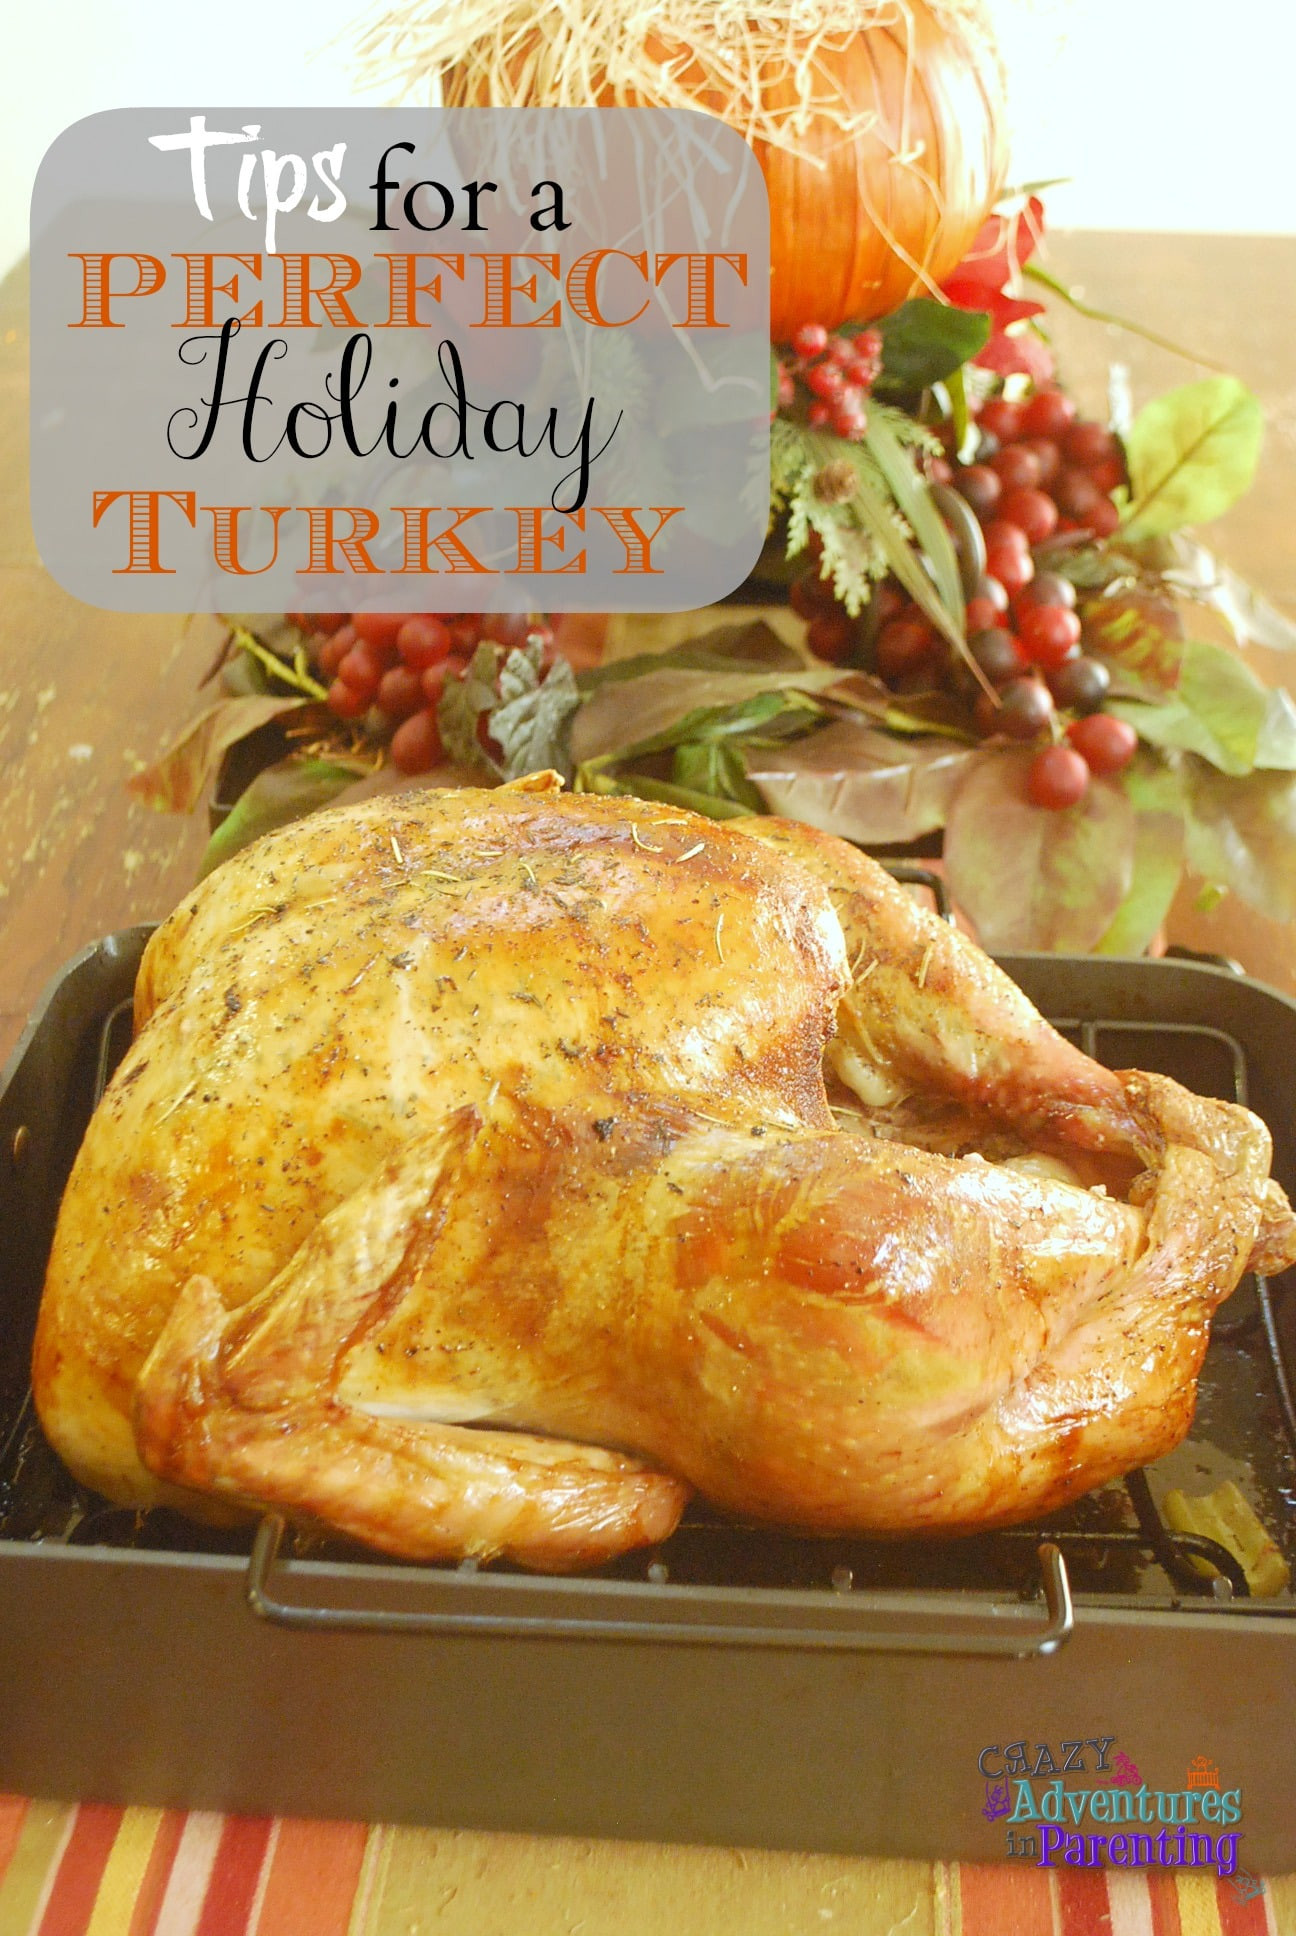 The Best Thanksgiving Turkey Recipe
 Tips for the Best Holiday Turkey Recipe